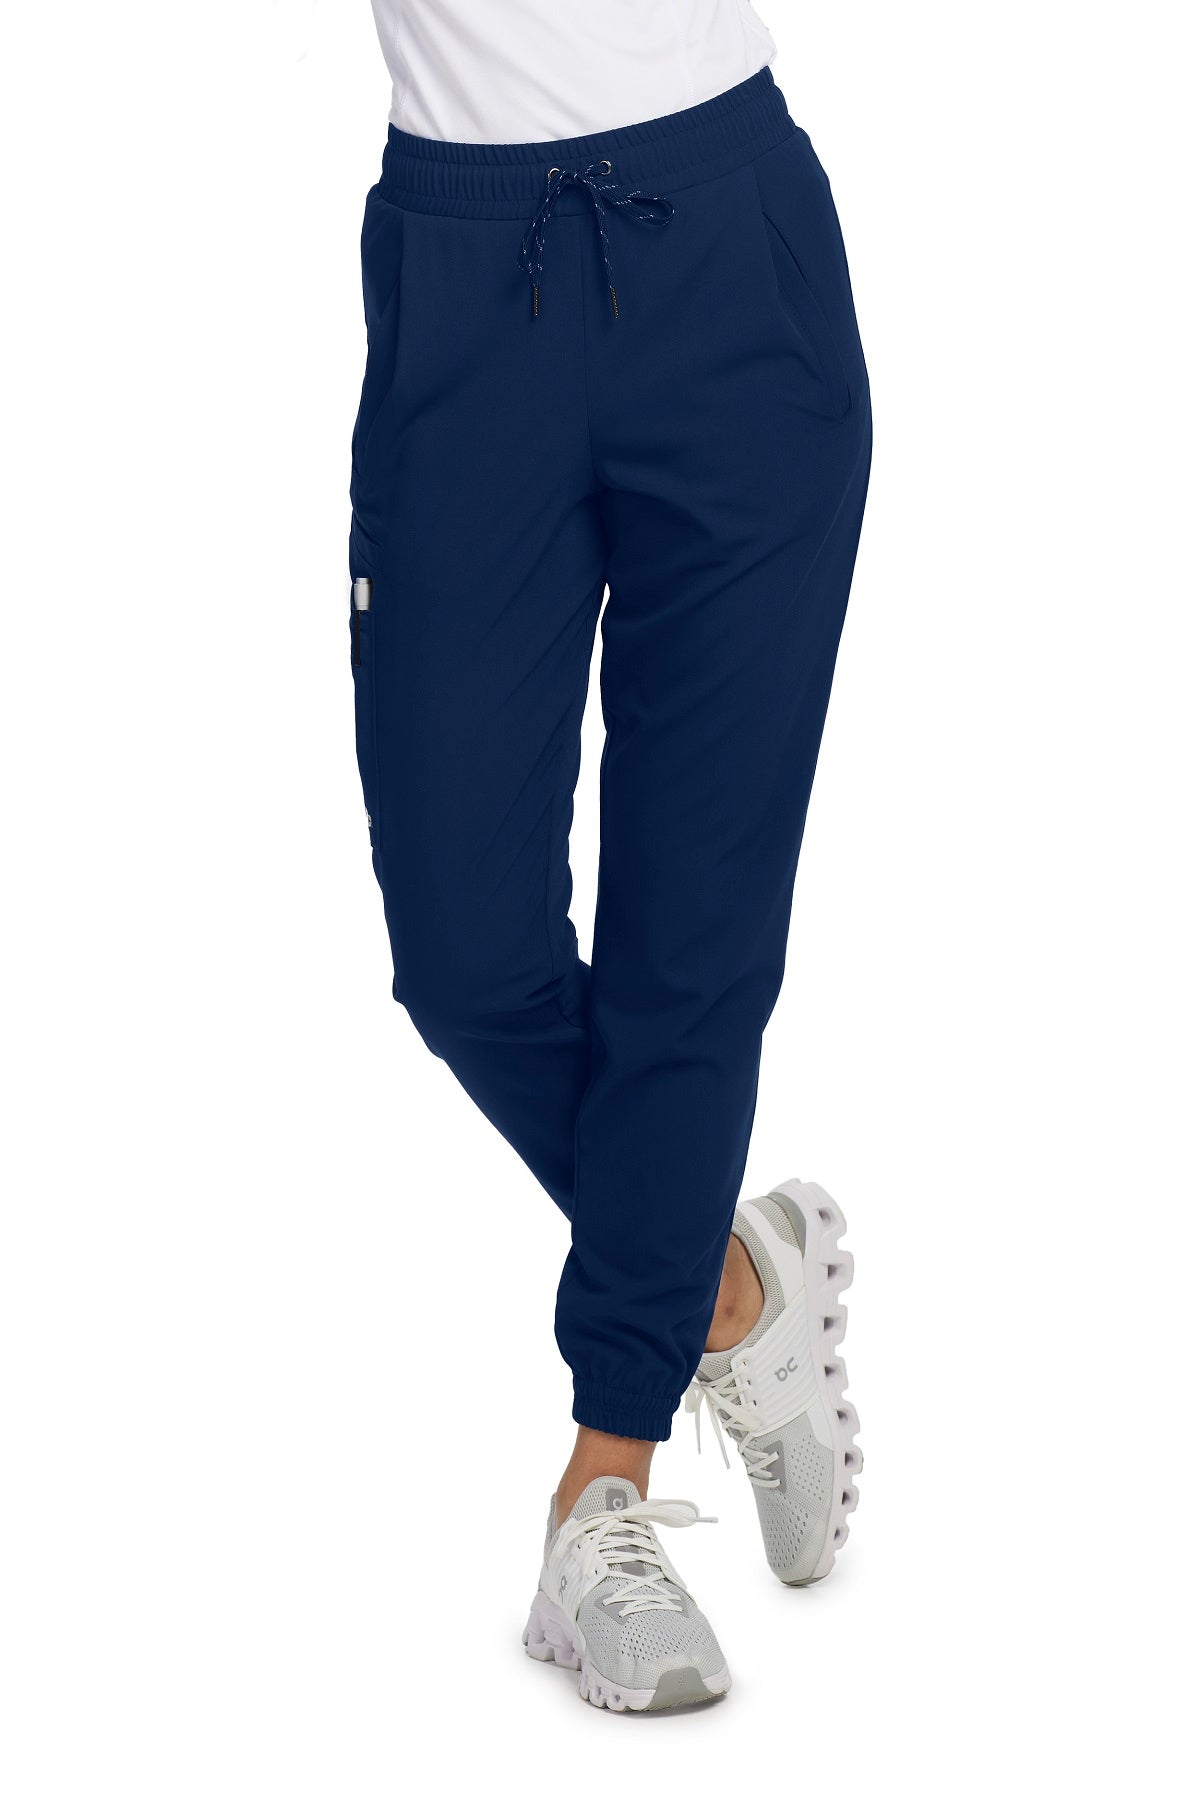 Barco Unify Scrub Pants Mission Jogger Petite Length in Indigo at Parker's Clothing and Shoes.